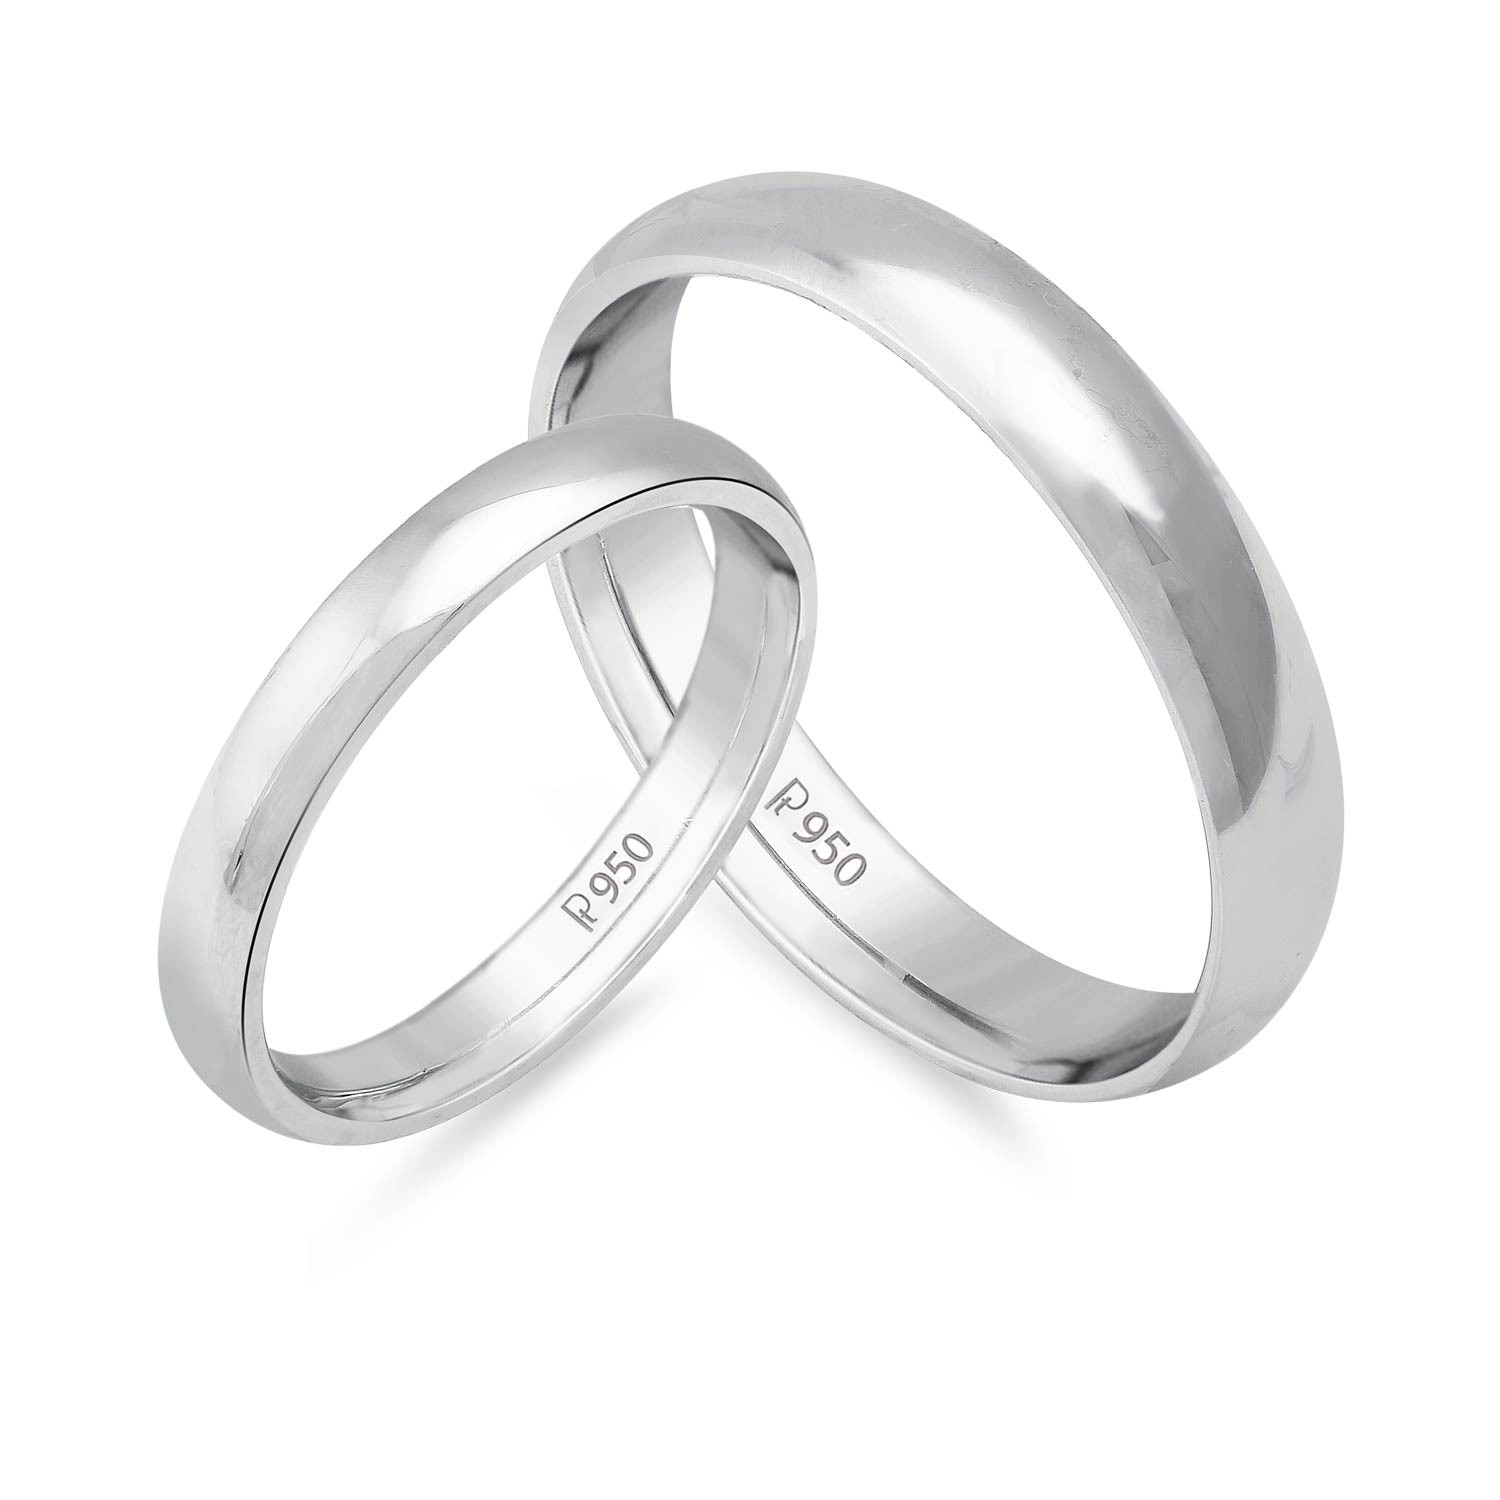 Jewelove - Beautiful Platinum Love Bands with solitaire in the women's ring.  Design : JL PT 597 by Jewelove. #jewelove #platinum #rings #couplerings  #couplering #love #couplegoals #platinumrings #platinumring  #platinumlovebands | Facebook